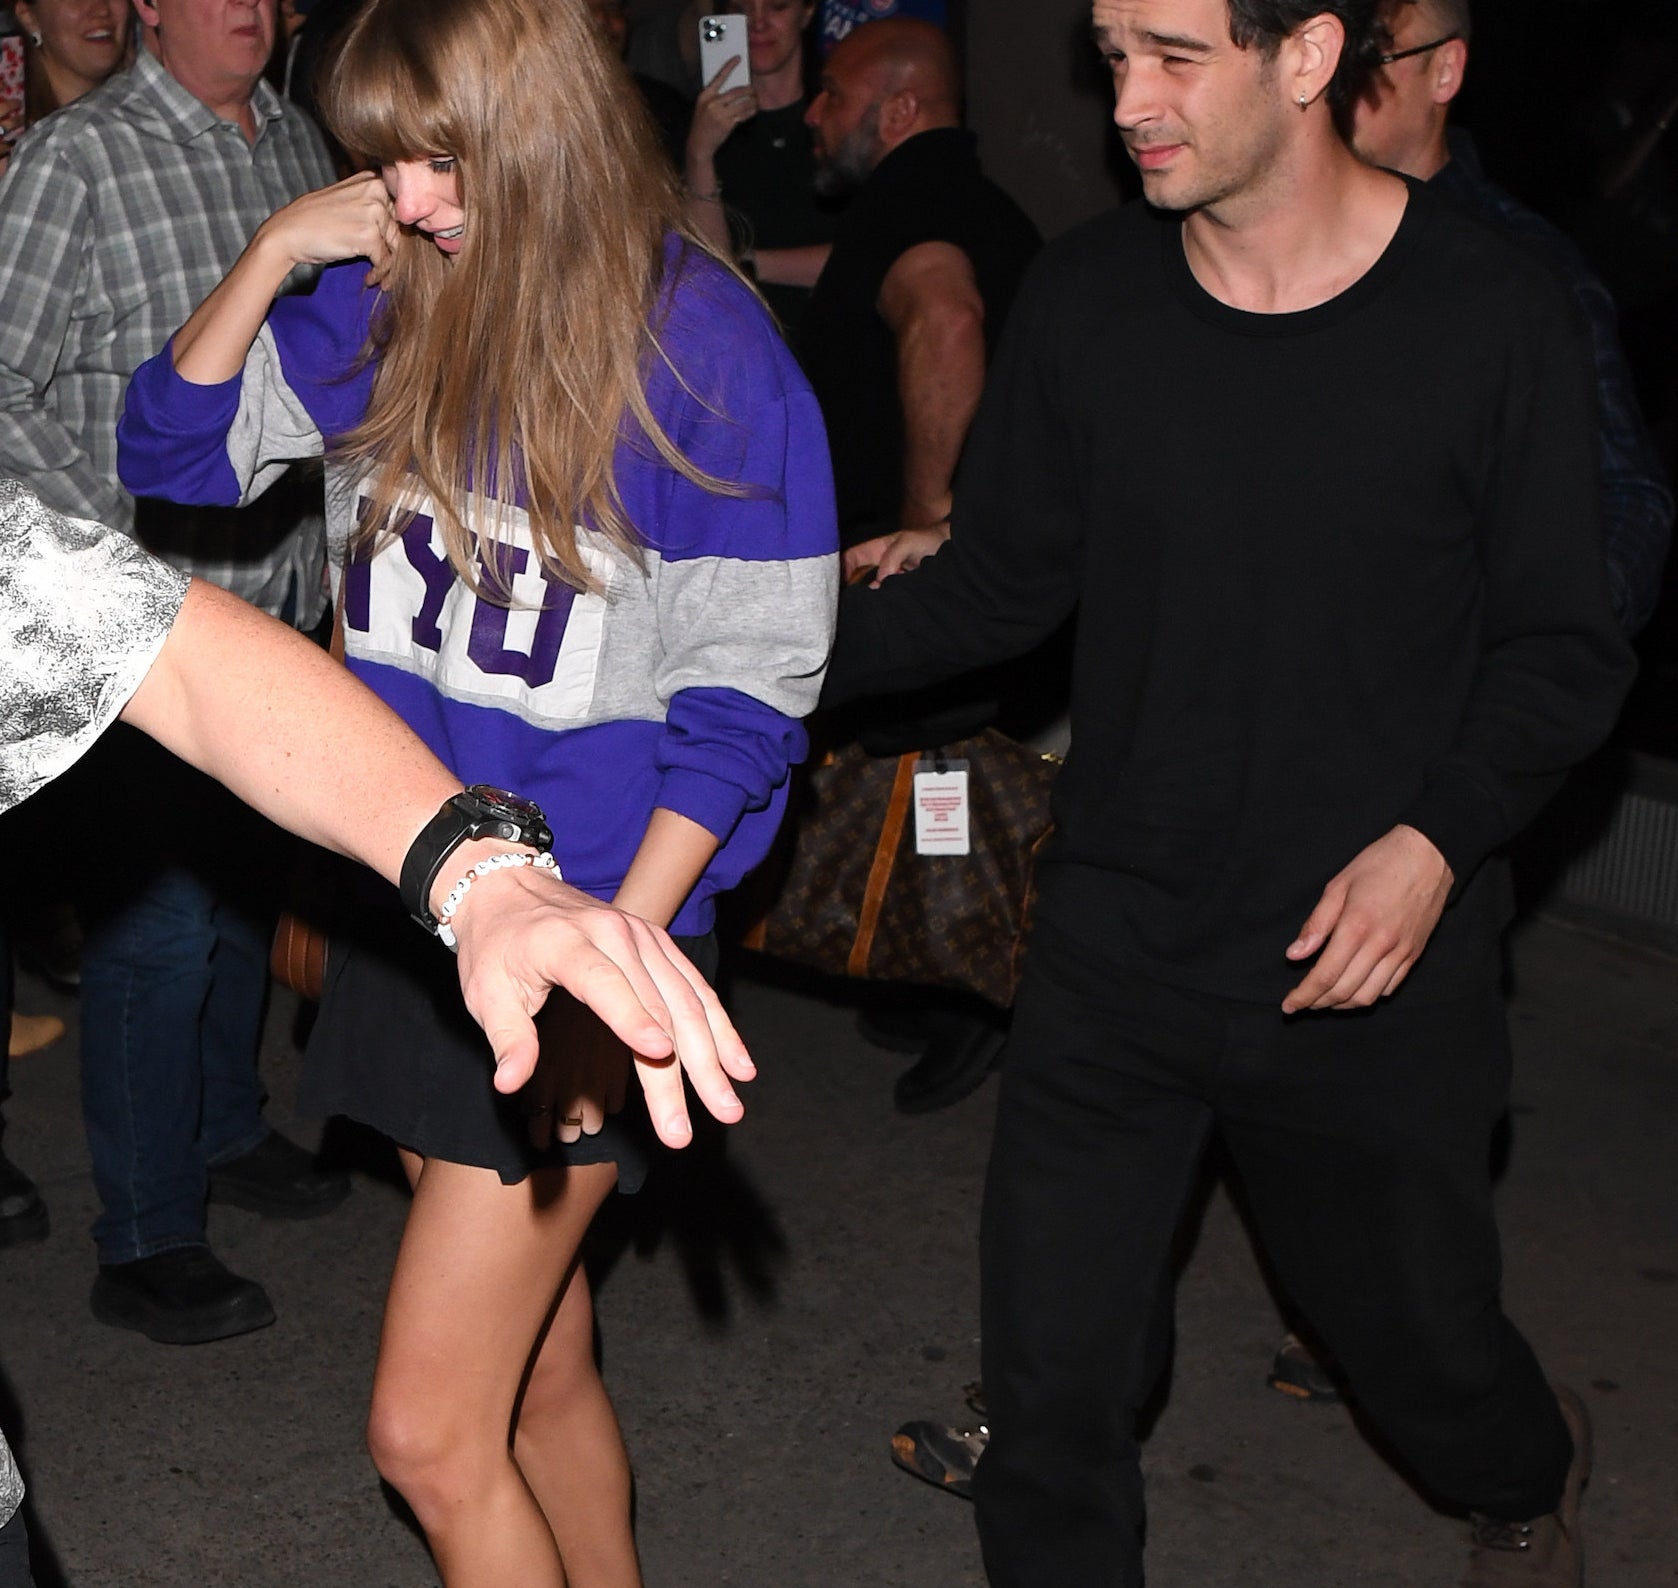 Taylor and Matty walking together